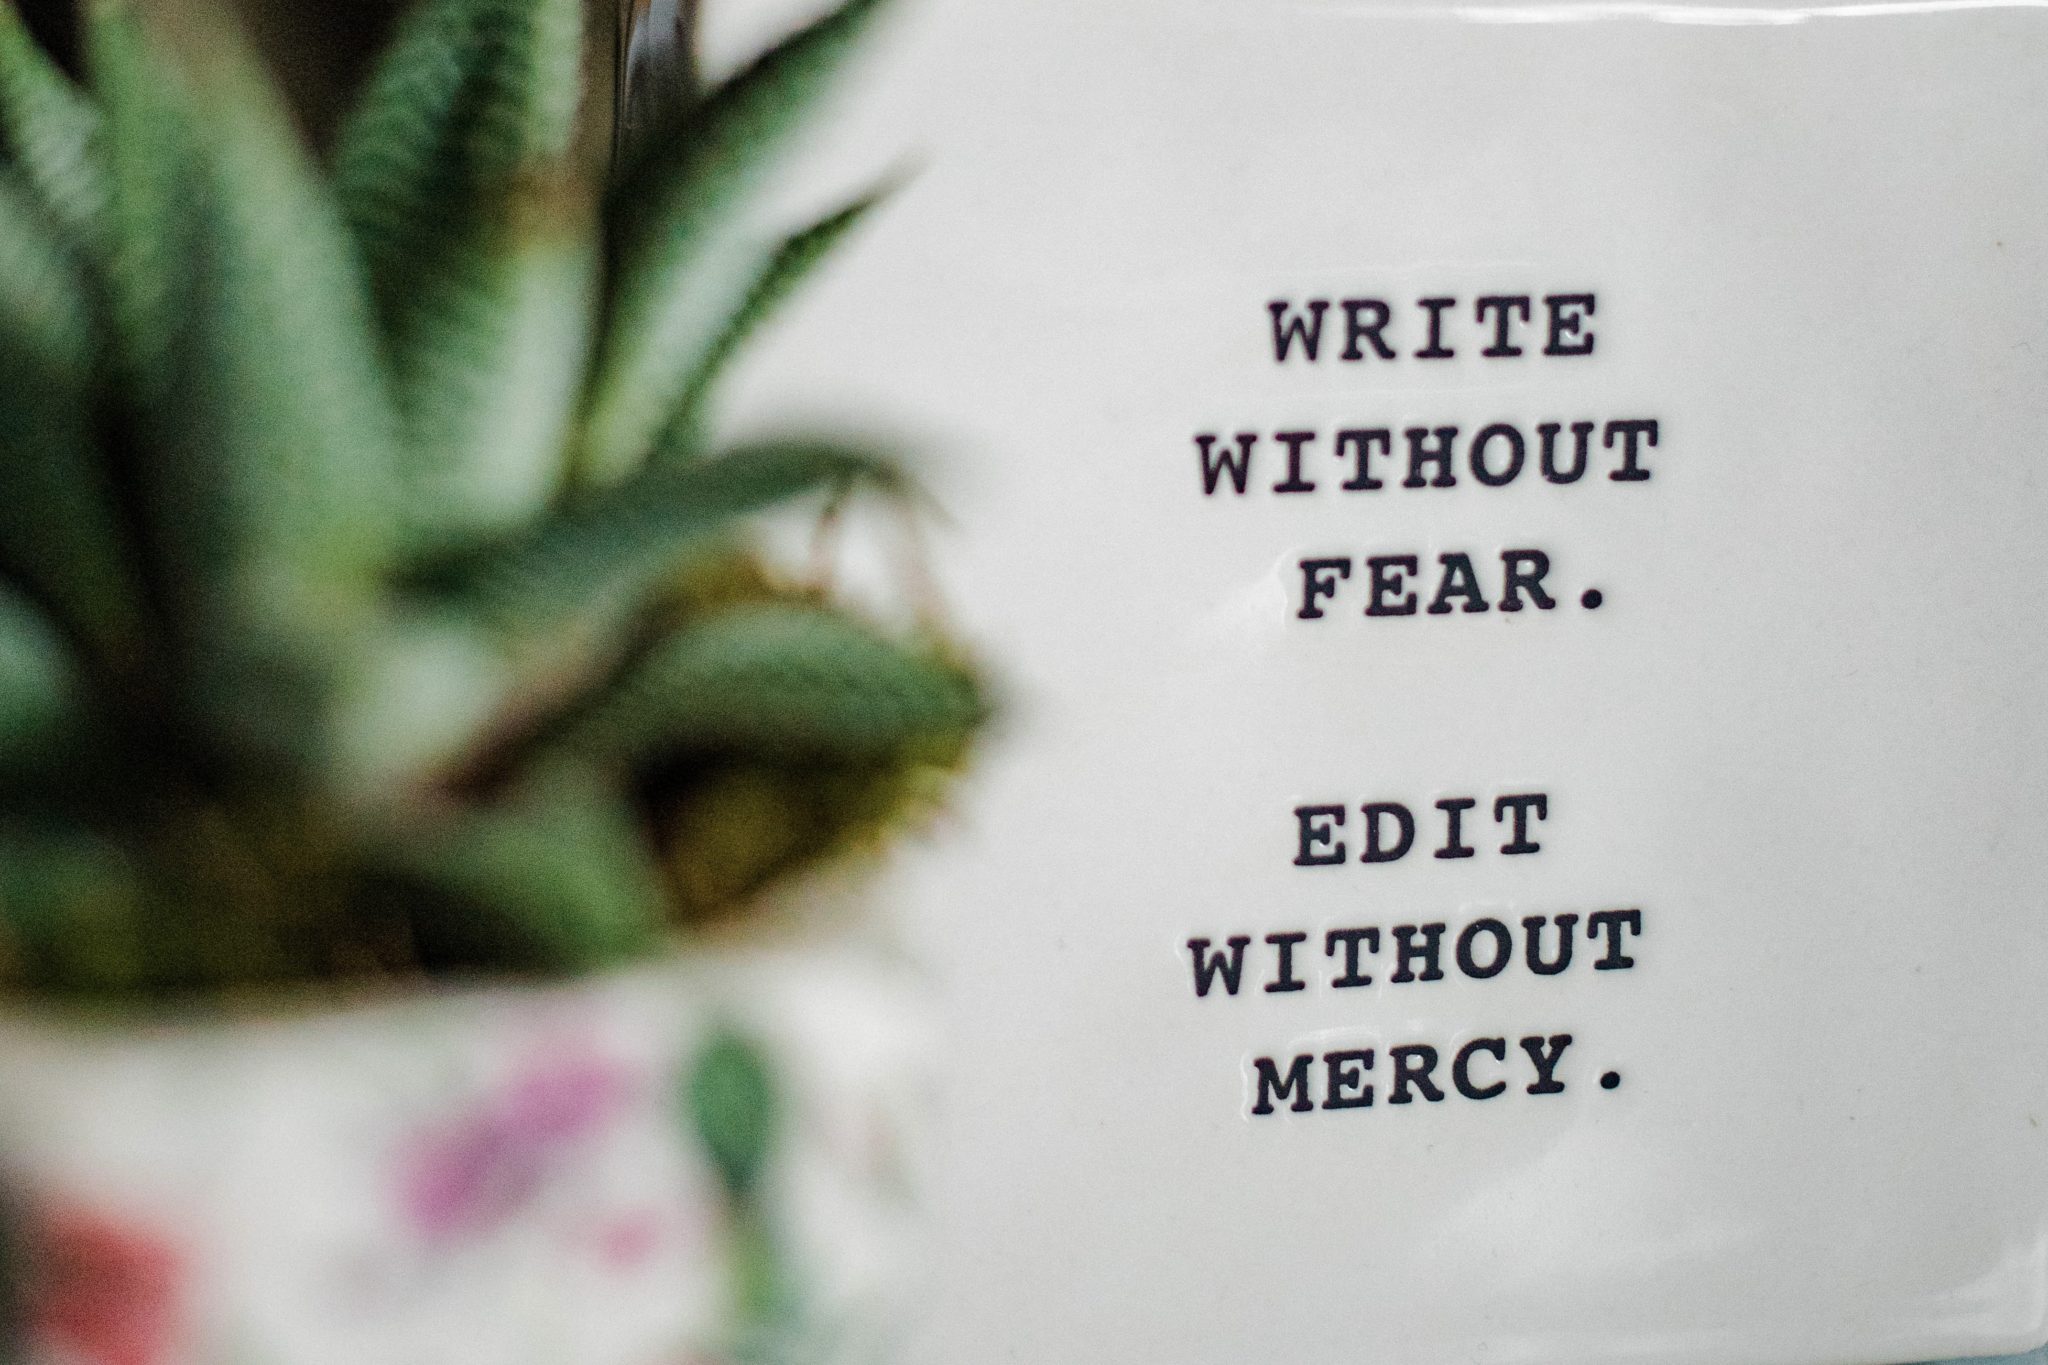 "Write without fear. Edit without mercy" quote